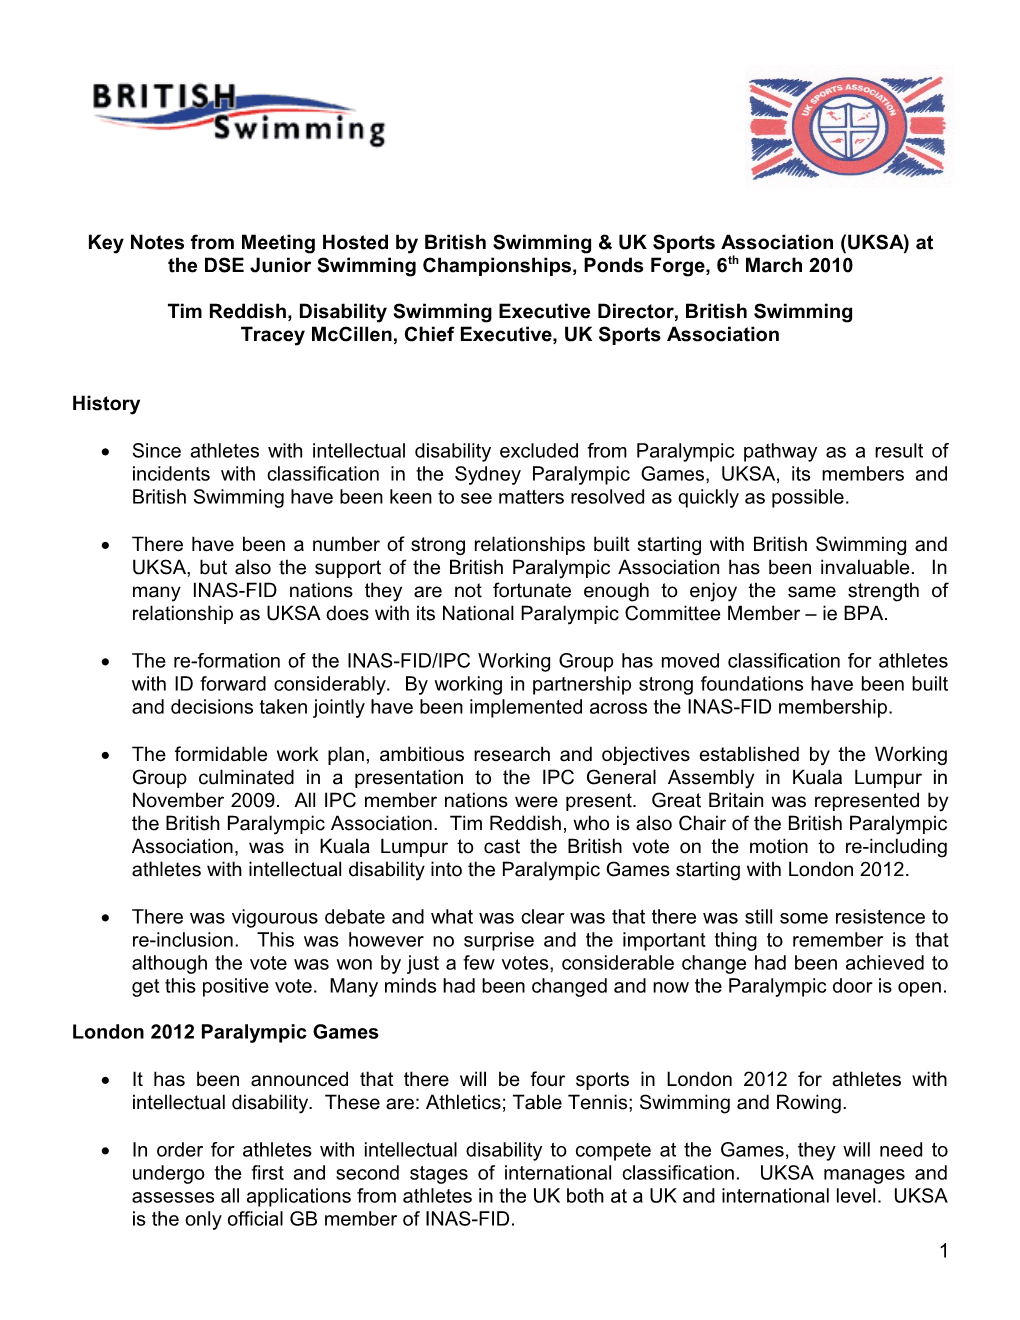 Key Notes from Meeting Hosted by British Swimming & UK Sports Association at the DSE Junior